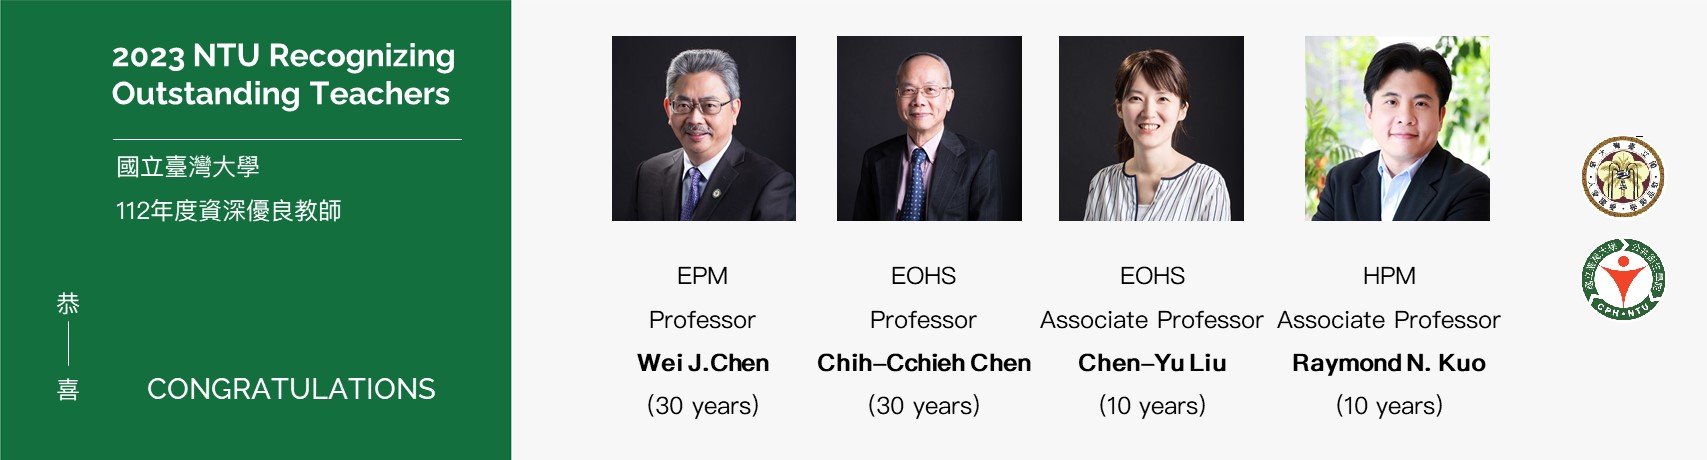 【Congratulations!】CPH faculties have awarded 2023 NTU Recognizing Outstanding Teachers